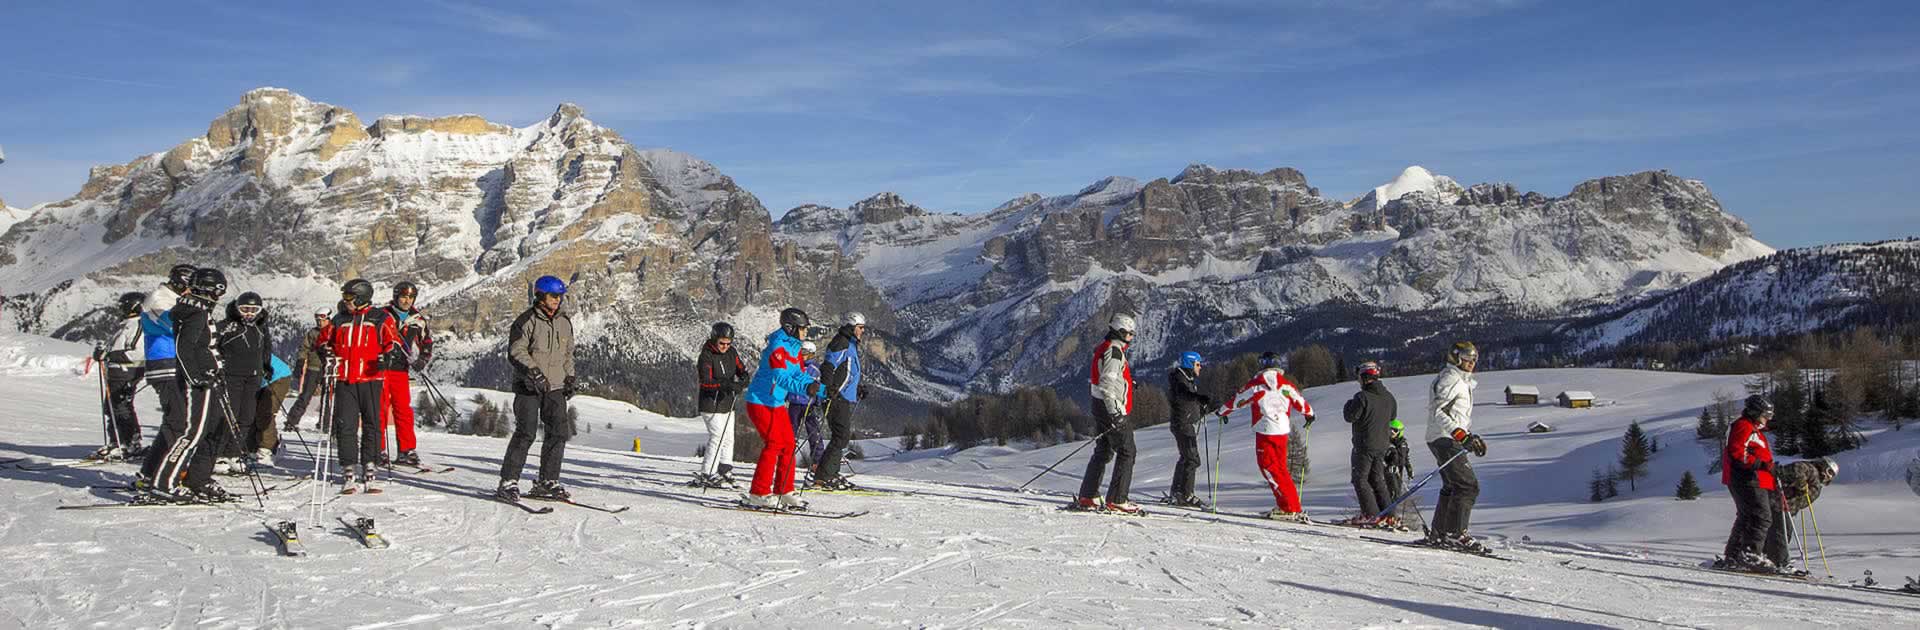 Skiing in Colofsco